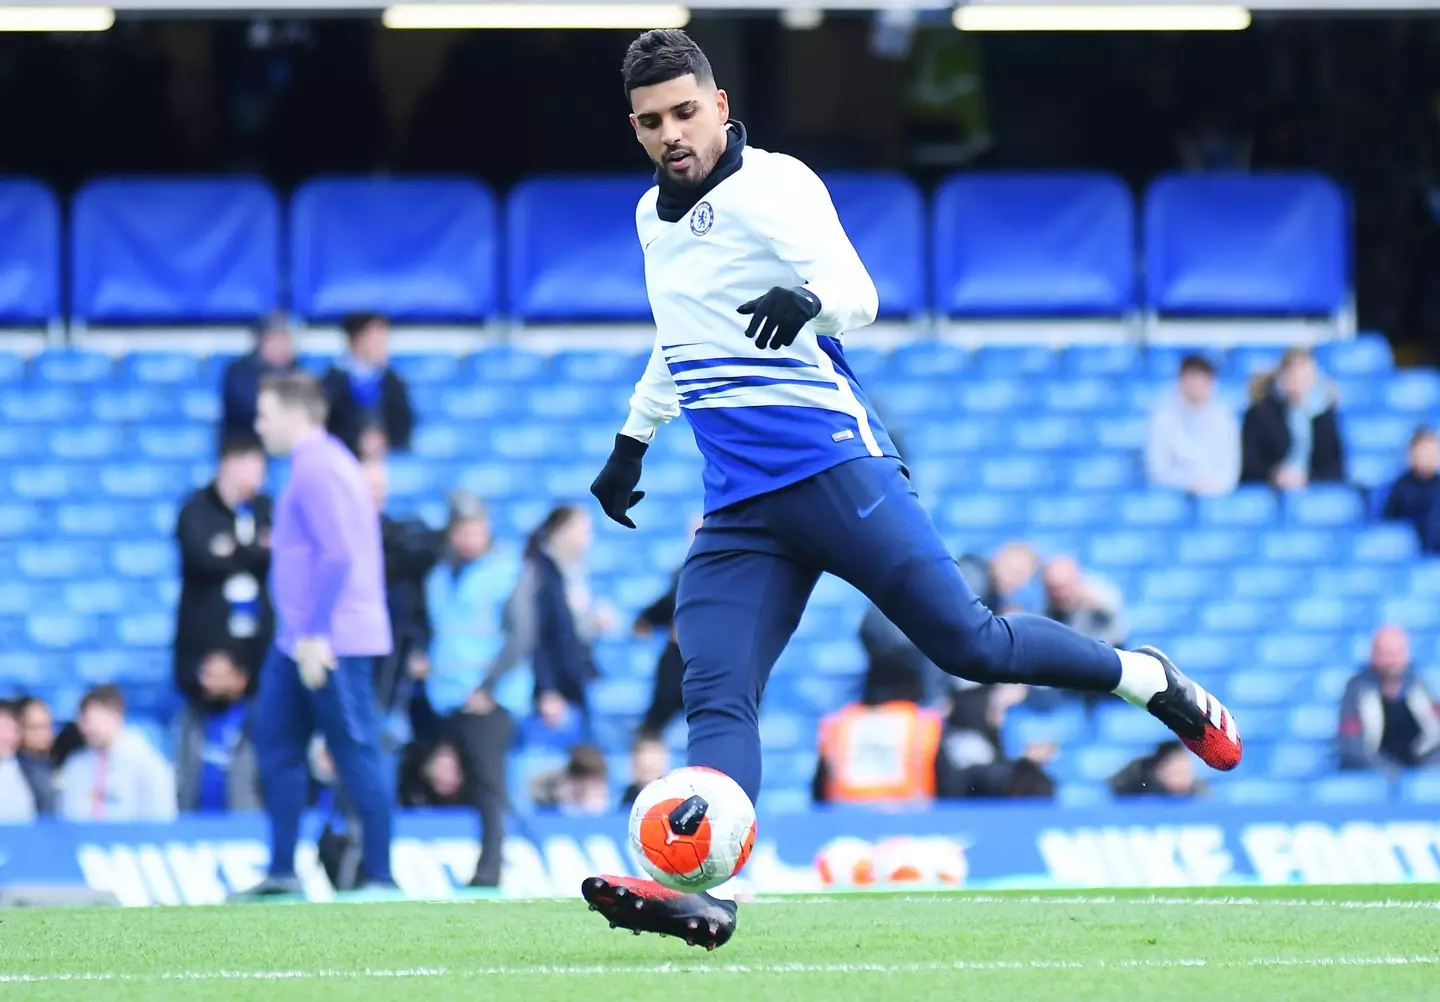  Emerson Palmieri dos Santos of Chelsea pictured during the 2019/20 Premier League game between Chelsea and Tottenham Hotspur. (Alamy)